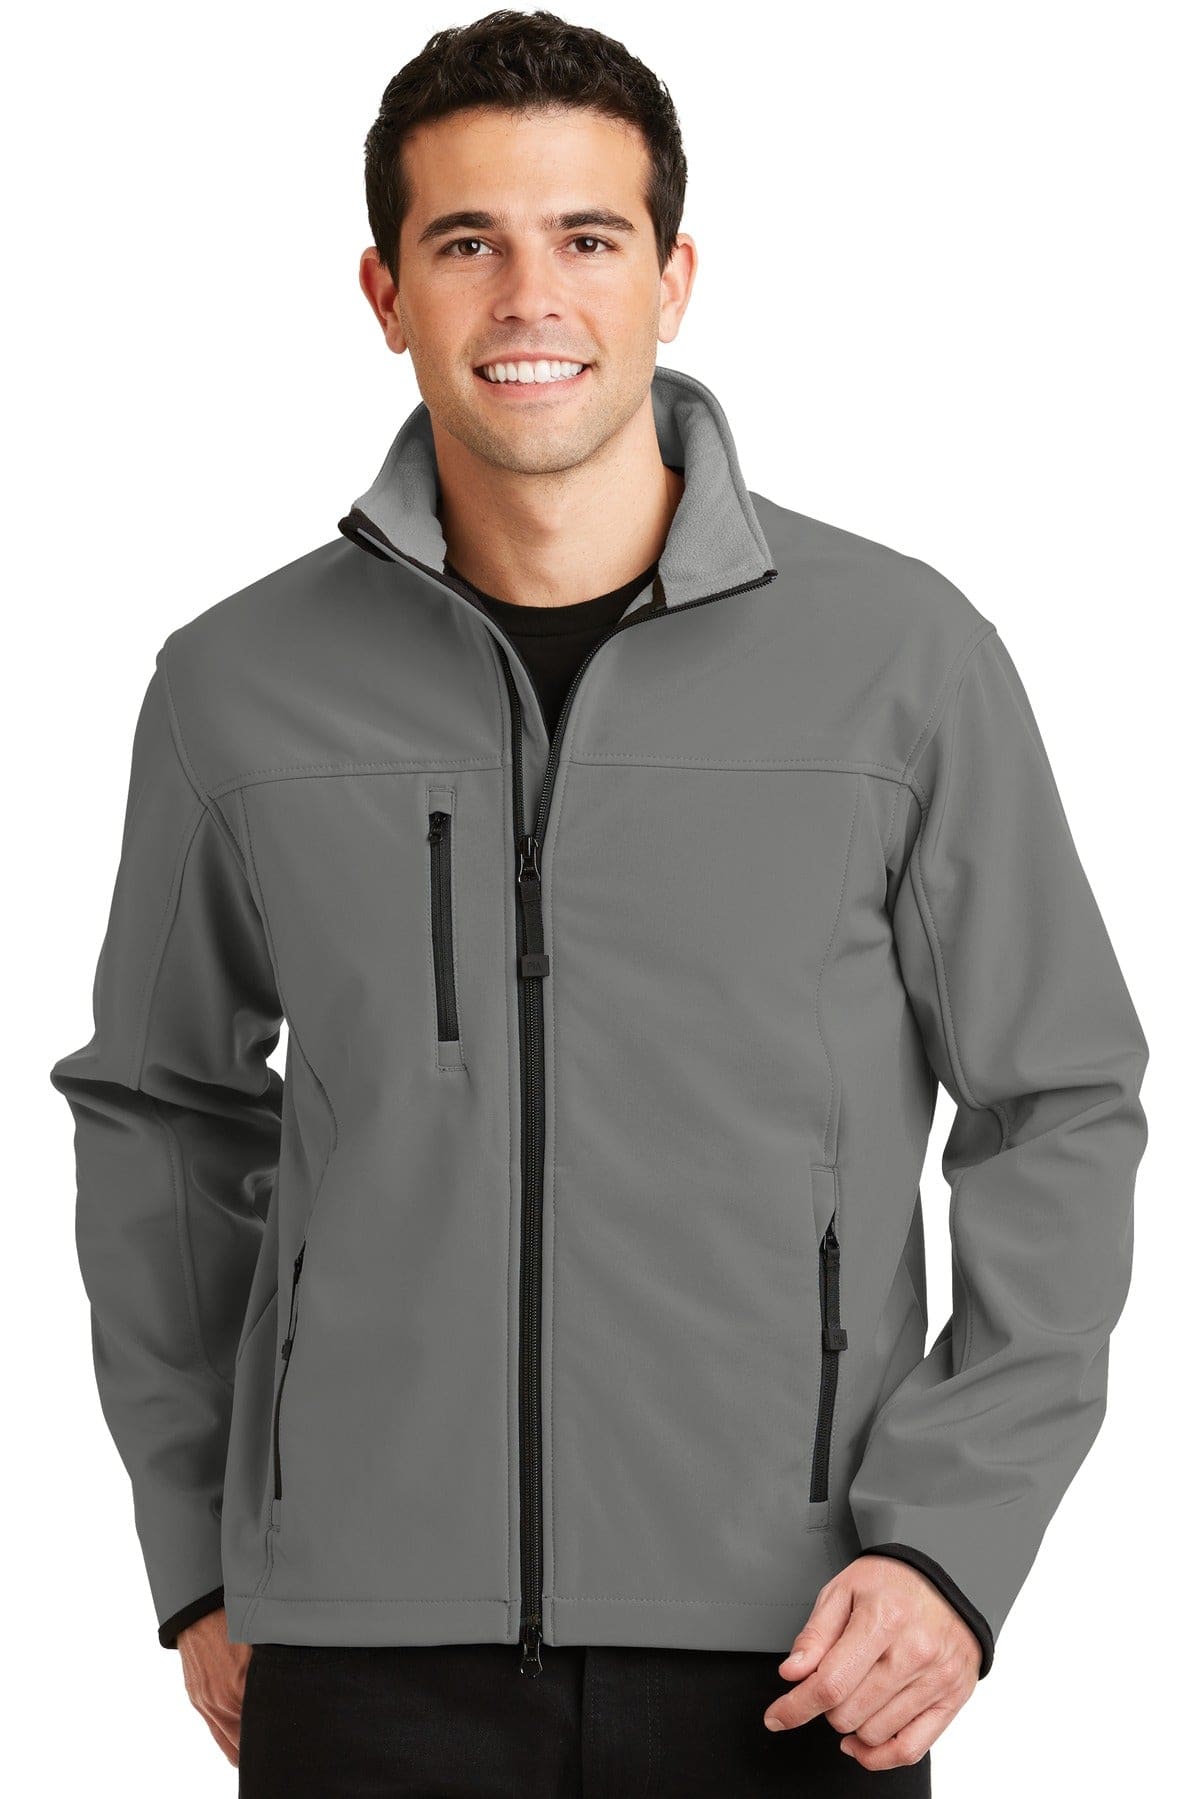 Port Authority Glacier Soft Shell Jacket. J790 - Activewear Outerwear